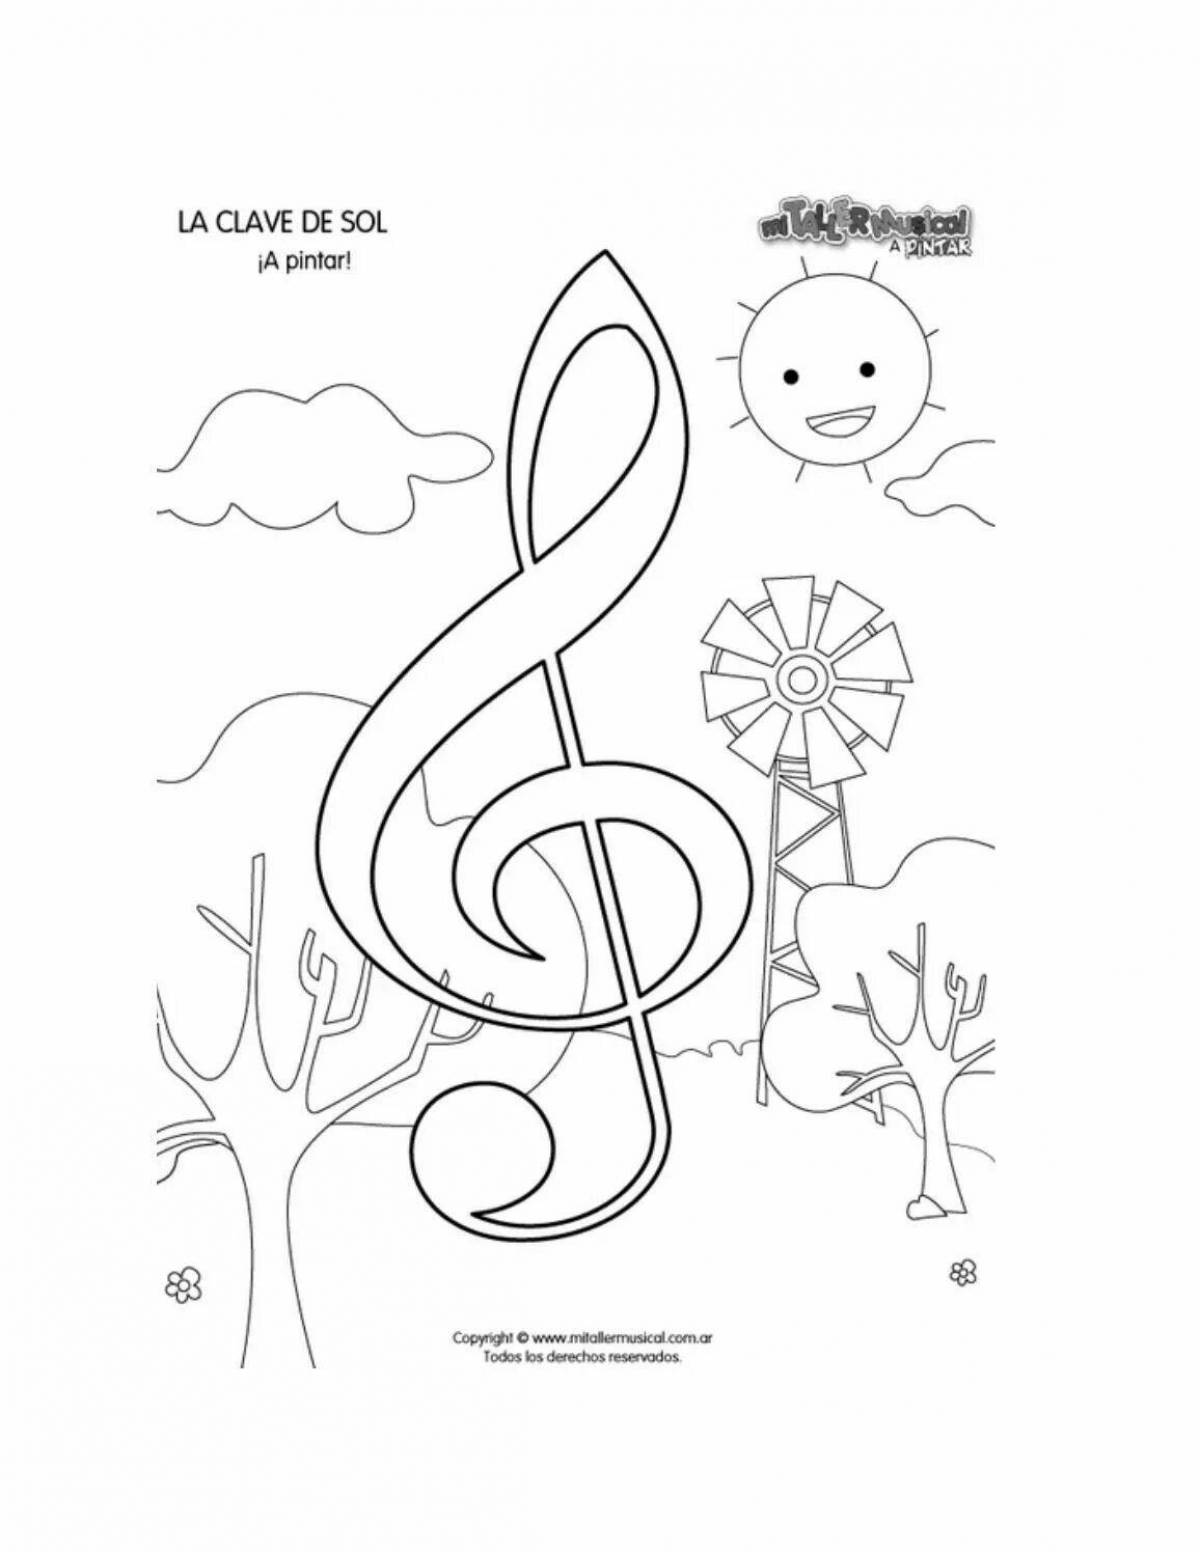 Colorful music coloring book for music geniuses